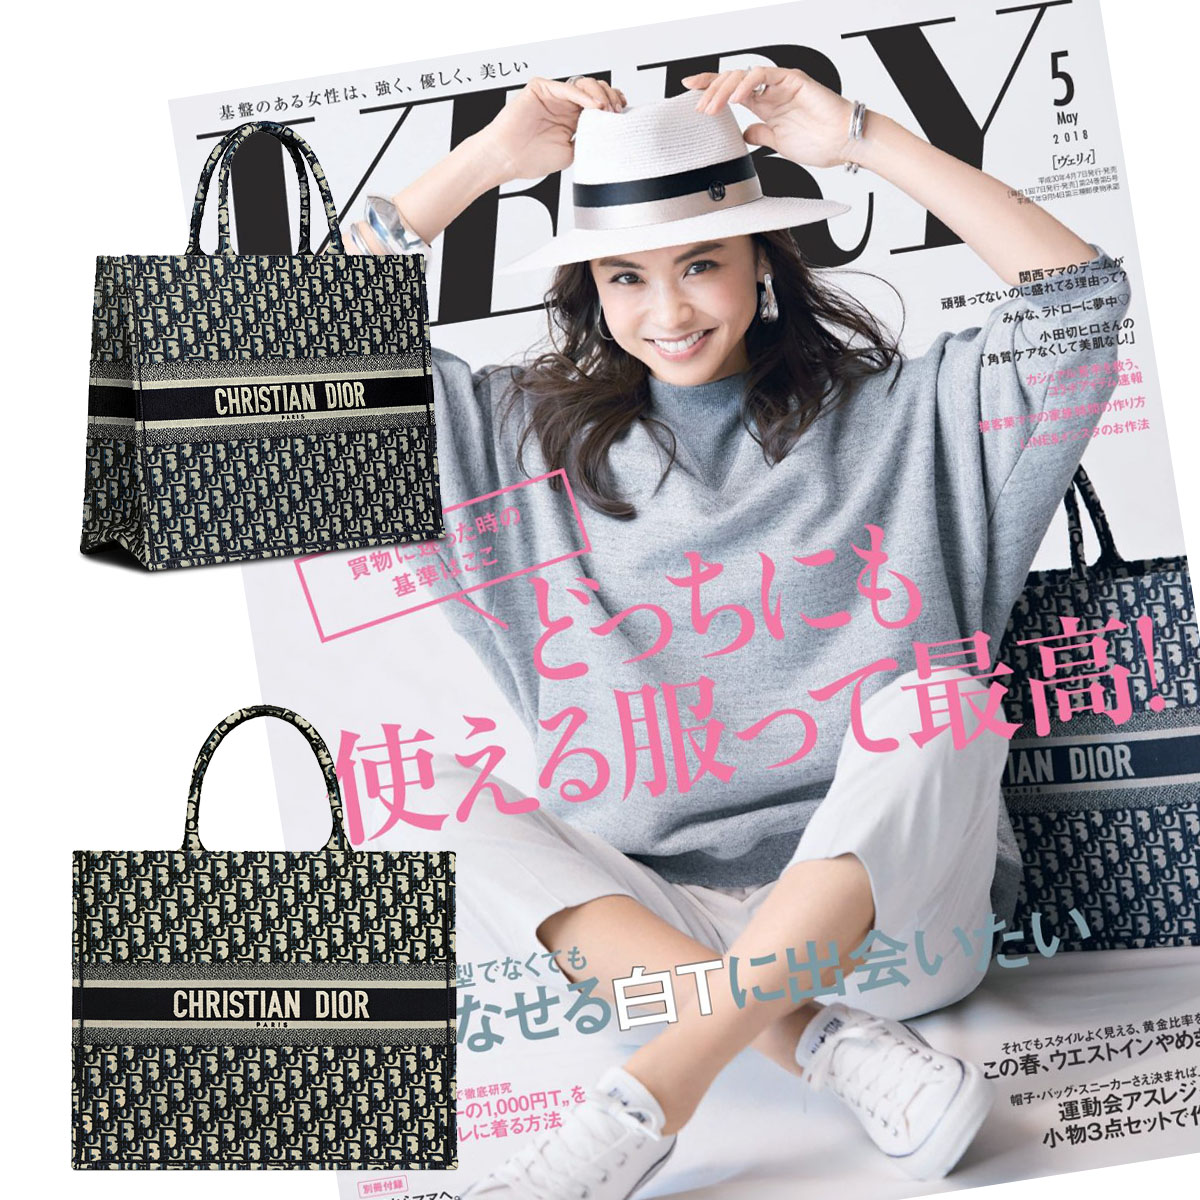 【Christian Dior】雑誌掲載！滝沢眞規子さん愛用の大人気エンブロイダリートートバッグが登場！Book Tote Bag????